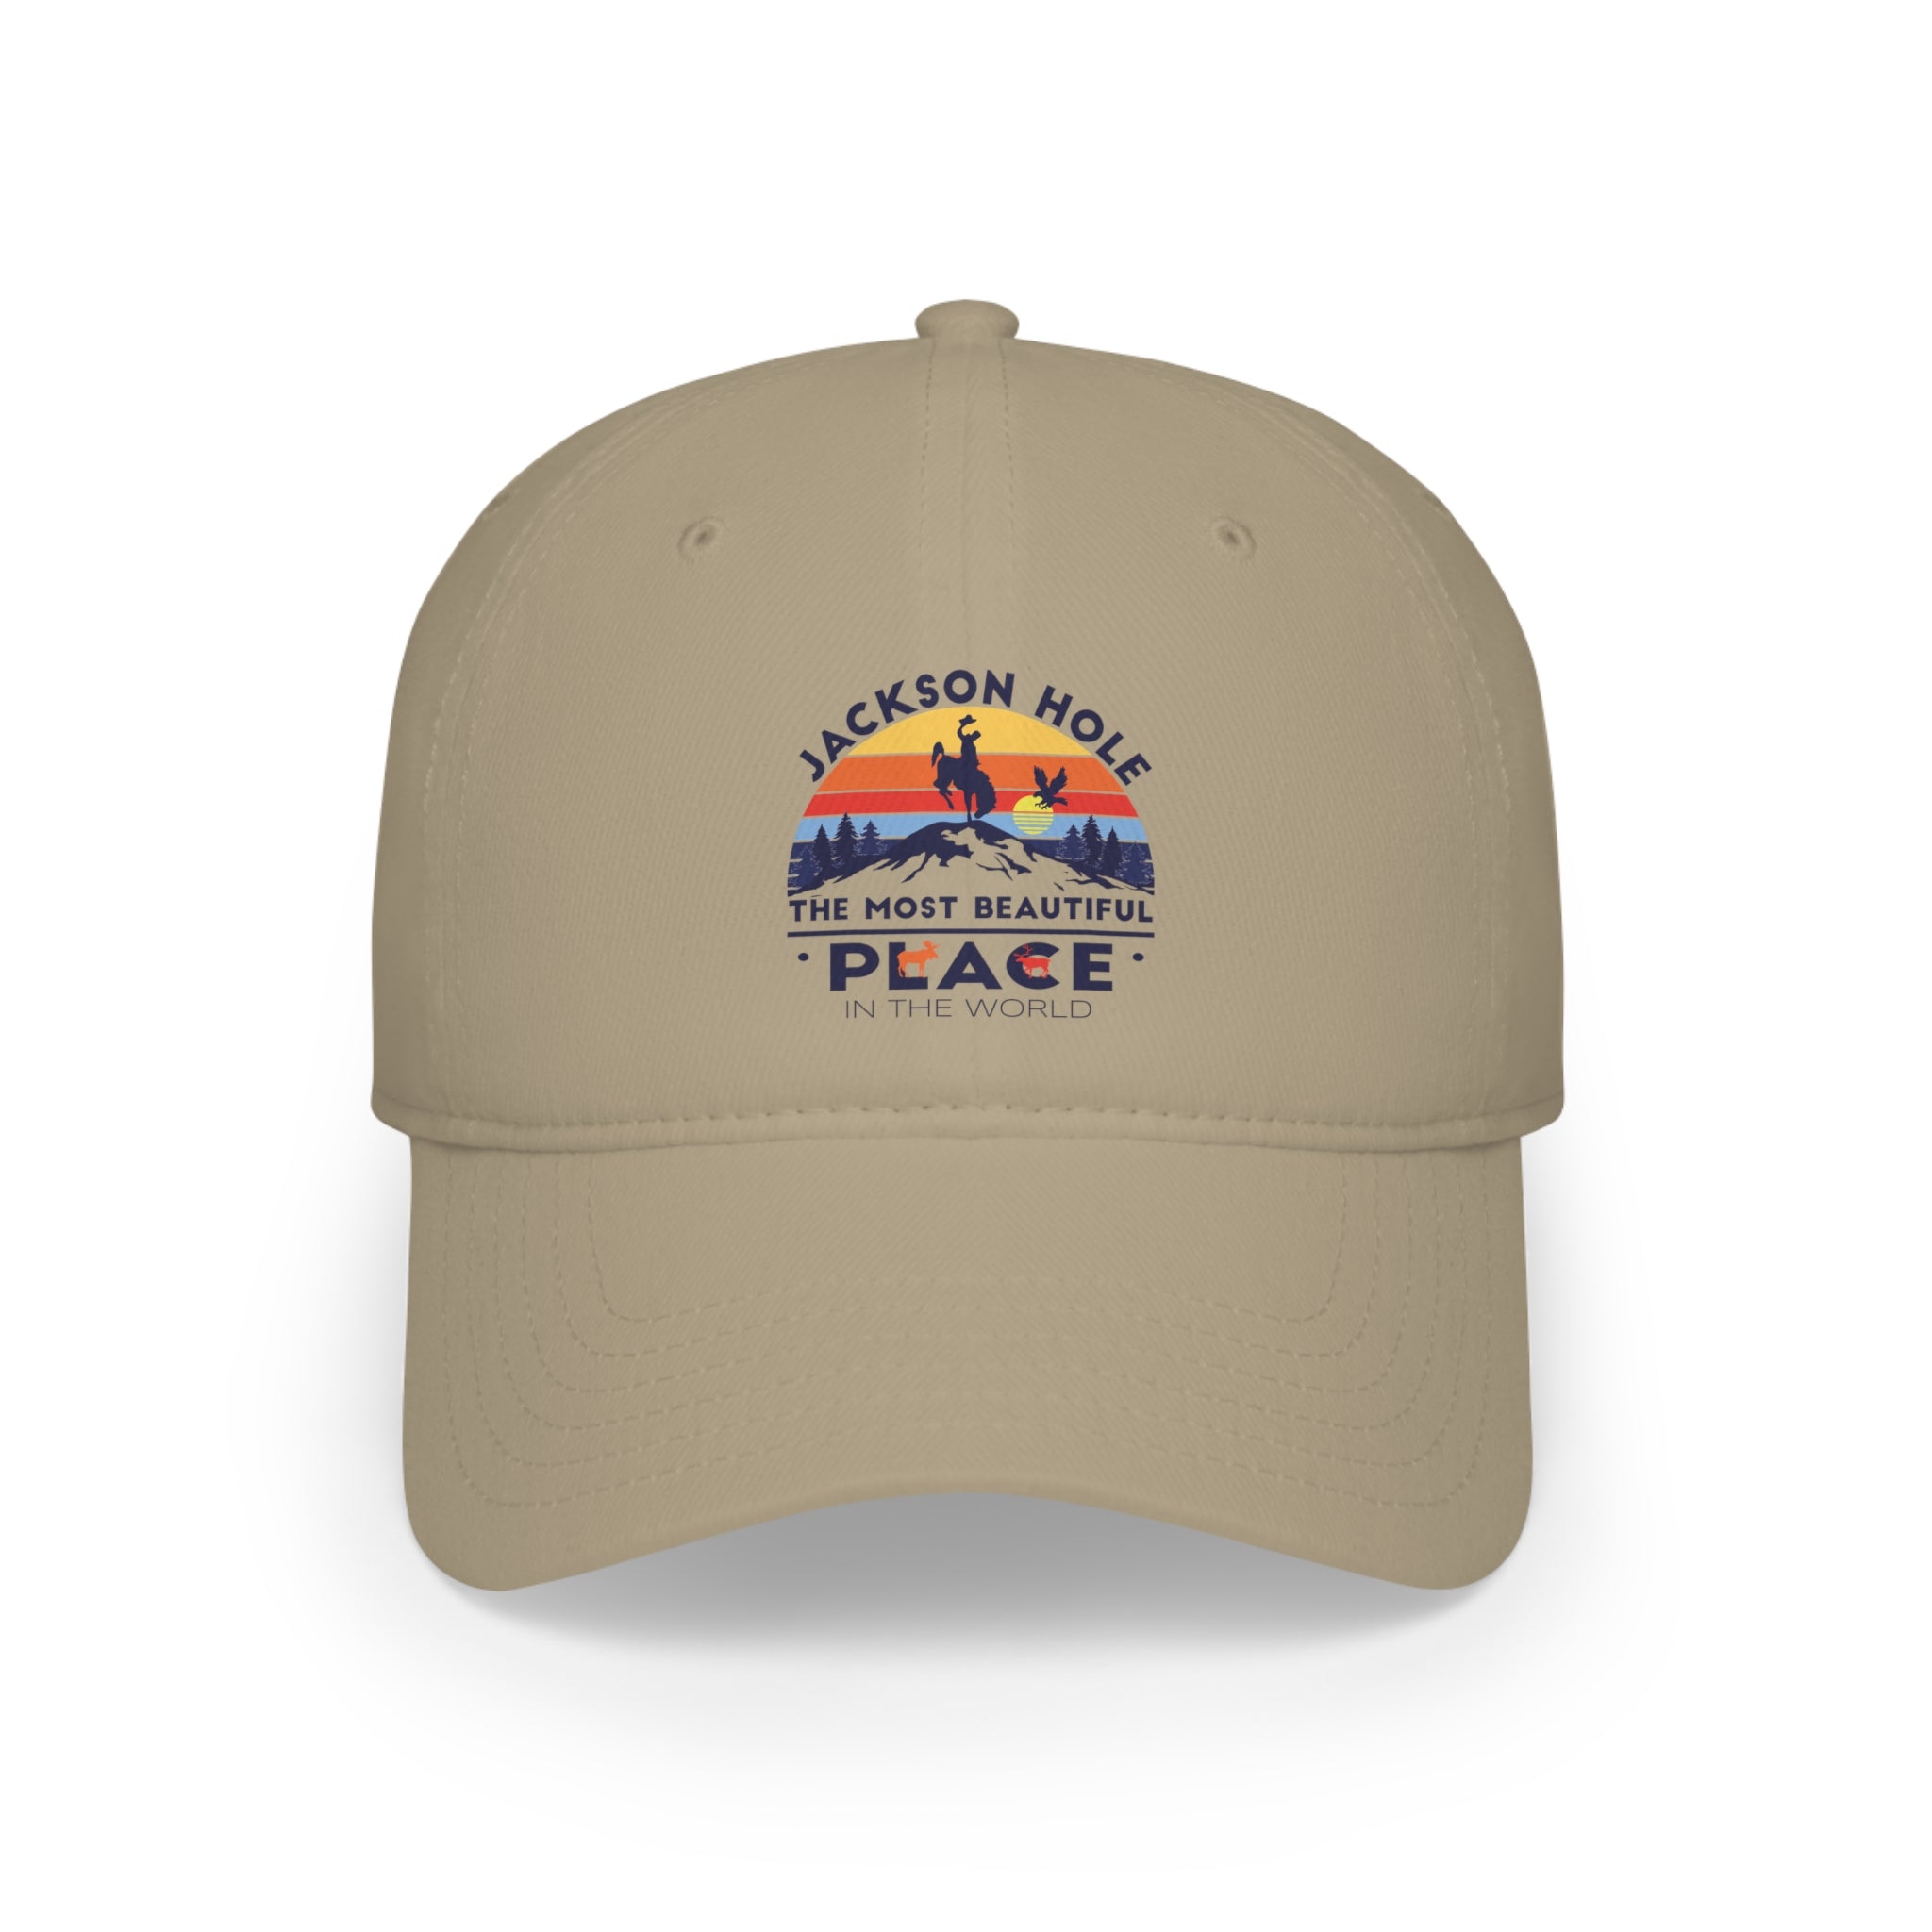 Discover the Beauty: Jackson Hole, Wyoming Low Profile Baseball Cap